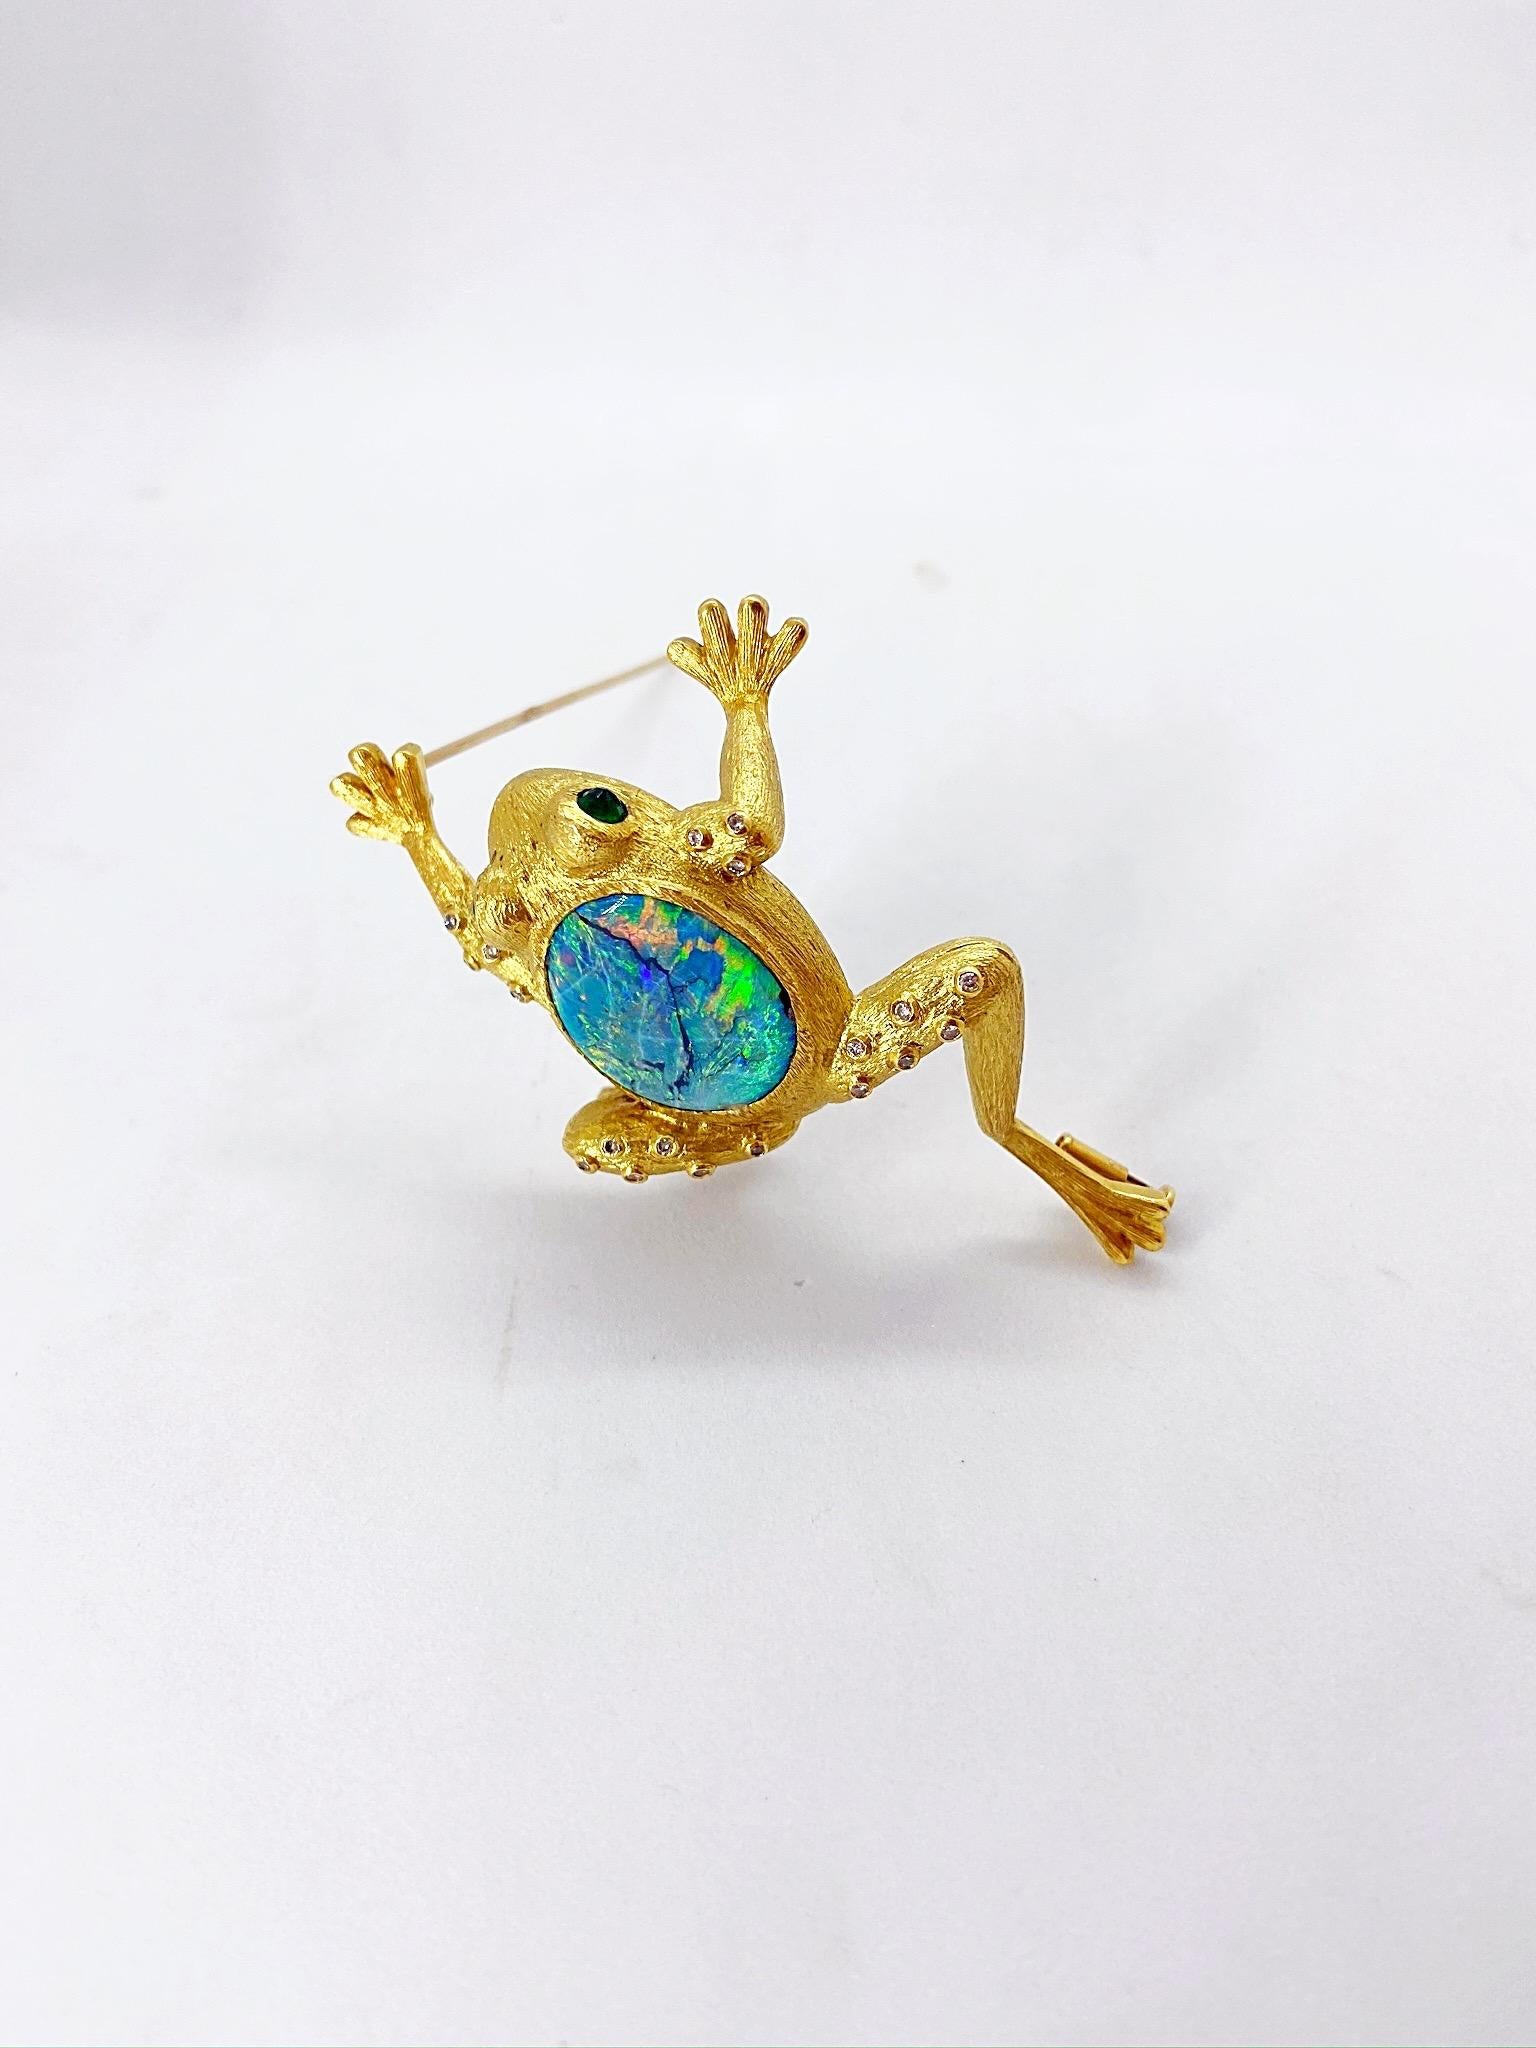 Retro E. Wolfe & Co 18kt Gold Frog Brooch with 9.60ct Black Opal, Diamonds & Emeralds For Sale